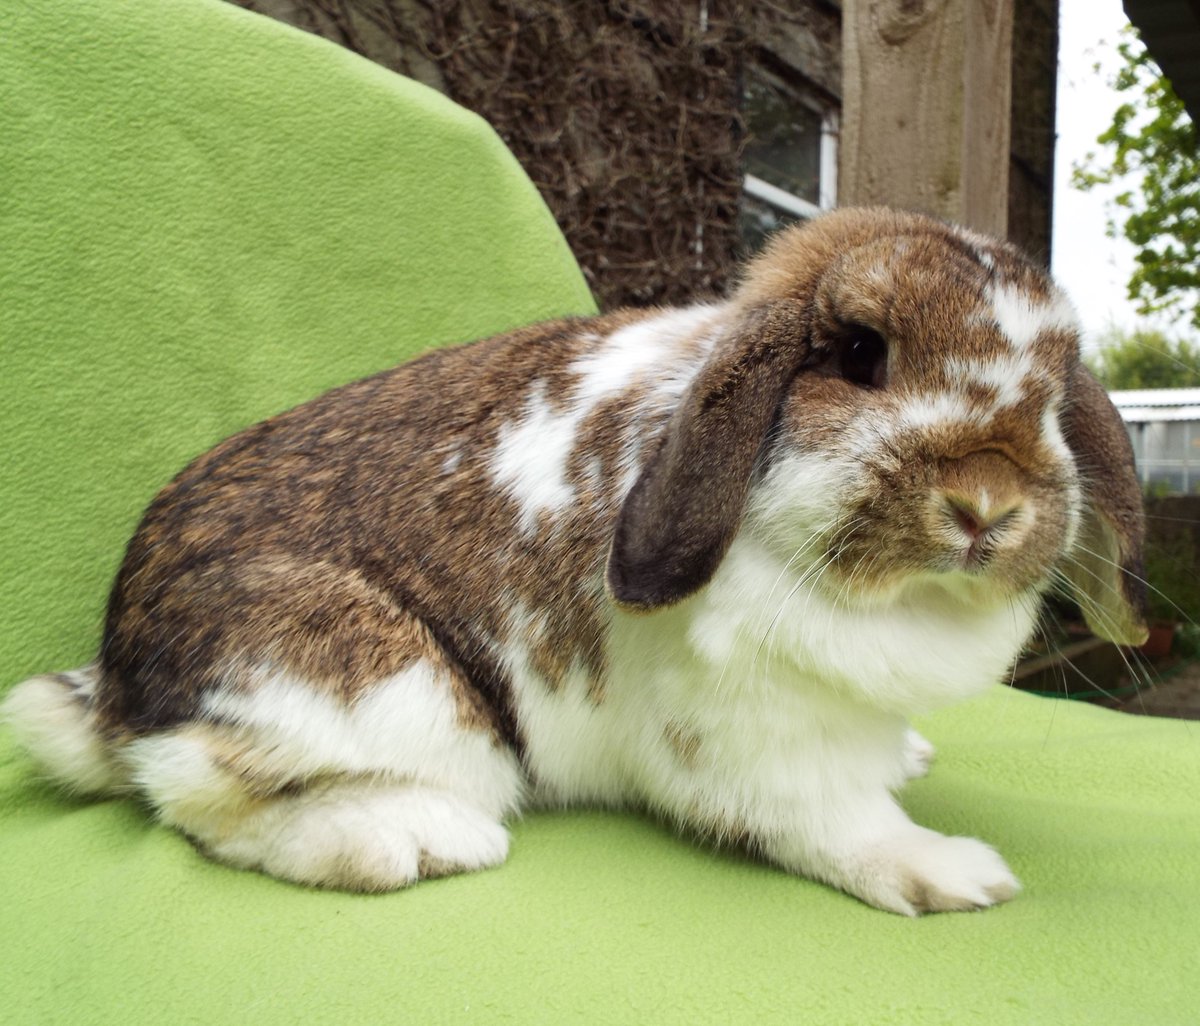 This is Daisy Duke who's new in, a lop female who was found in Blackburn and handed into a vet surgery, she's very lively, mischievous and may be trouble!🙂 She will need a new home once she's had her vaccine & neuter op 🐇 #rabbits #bunnies #FridayVibes #adoptdontshop